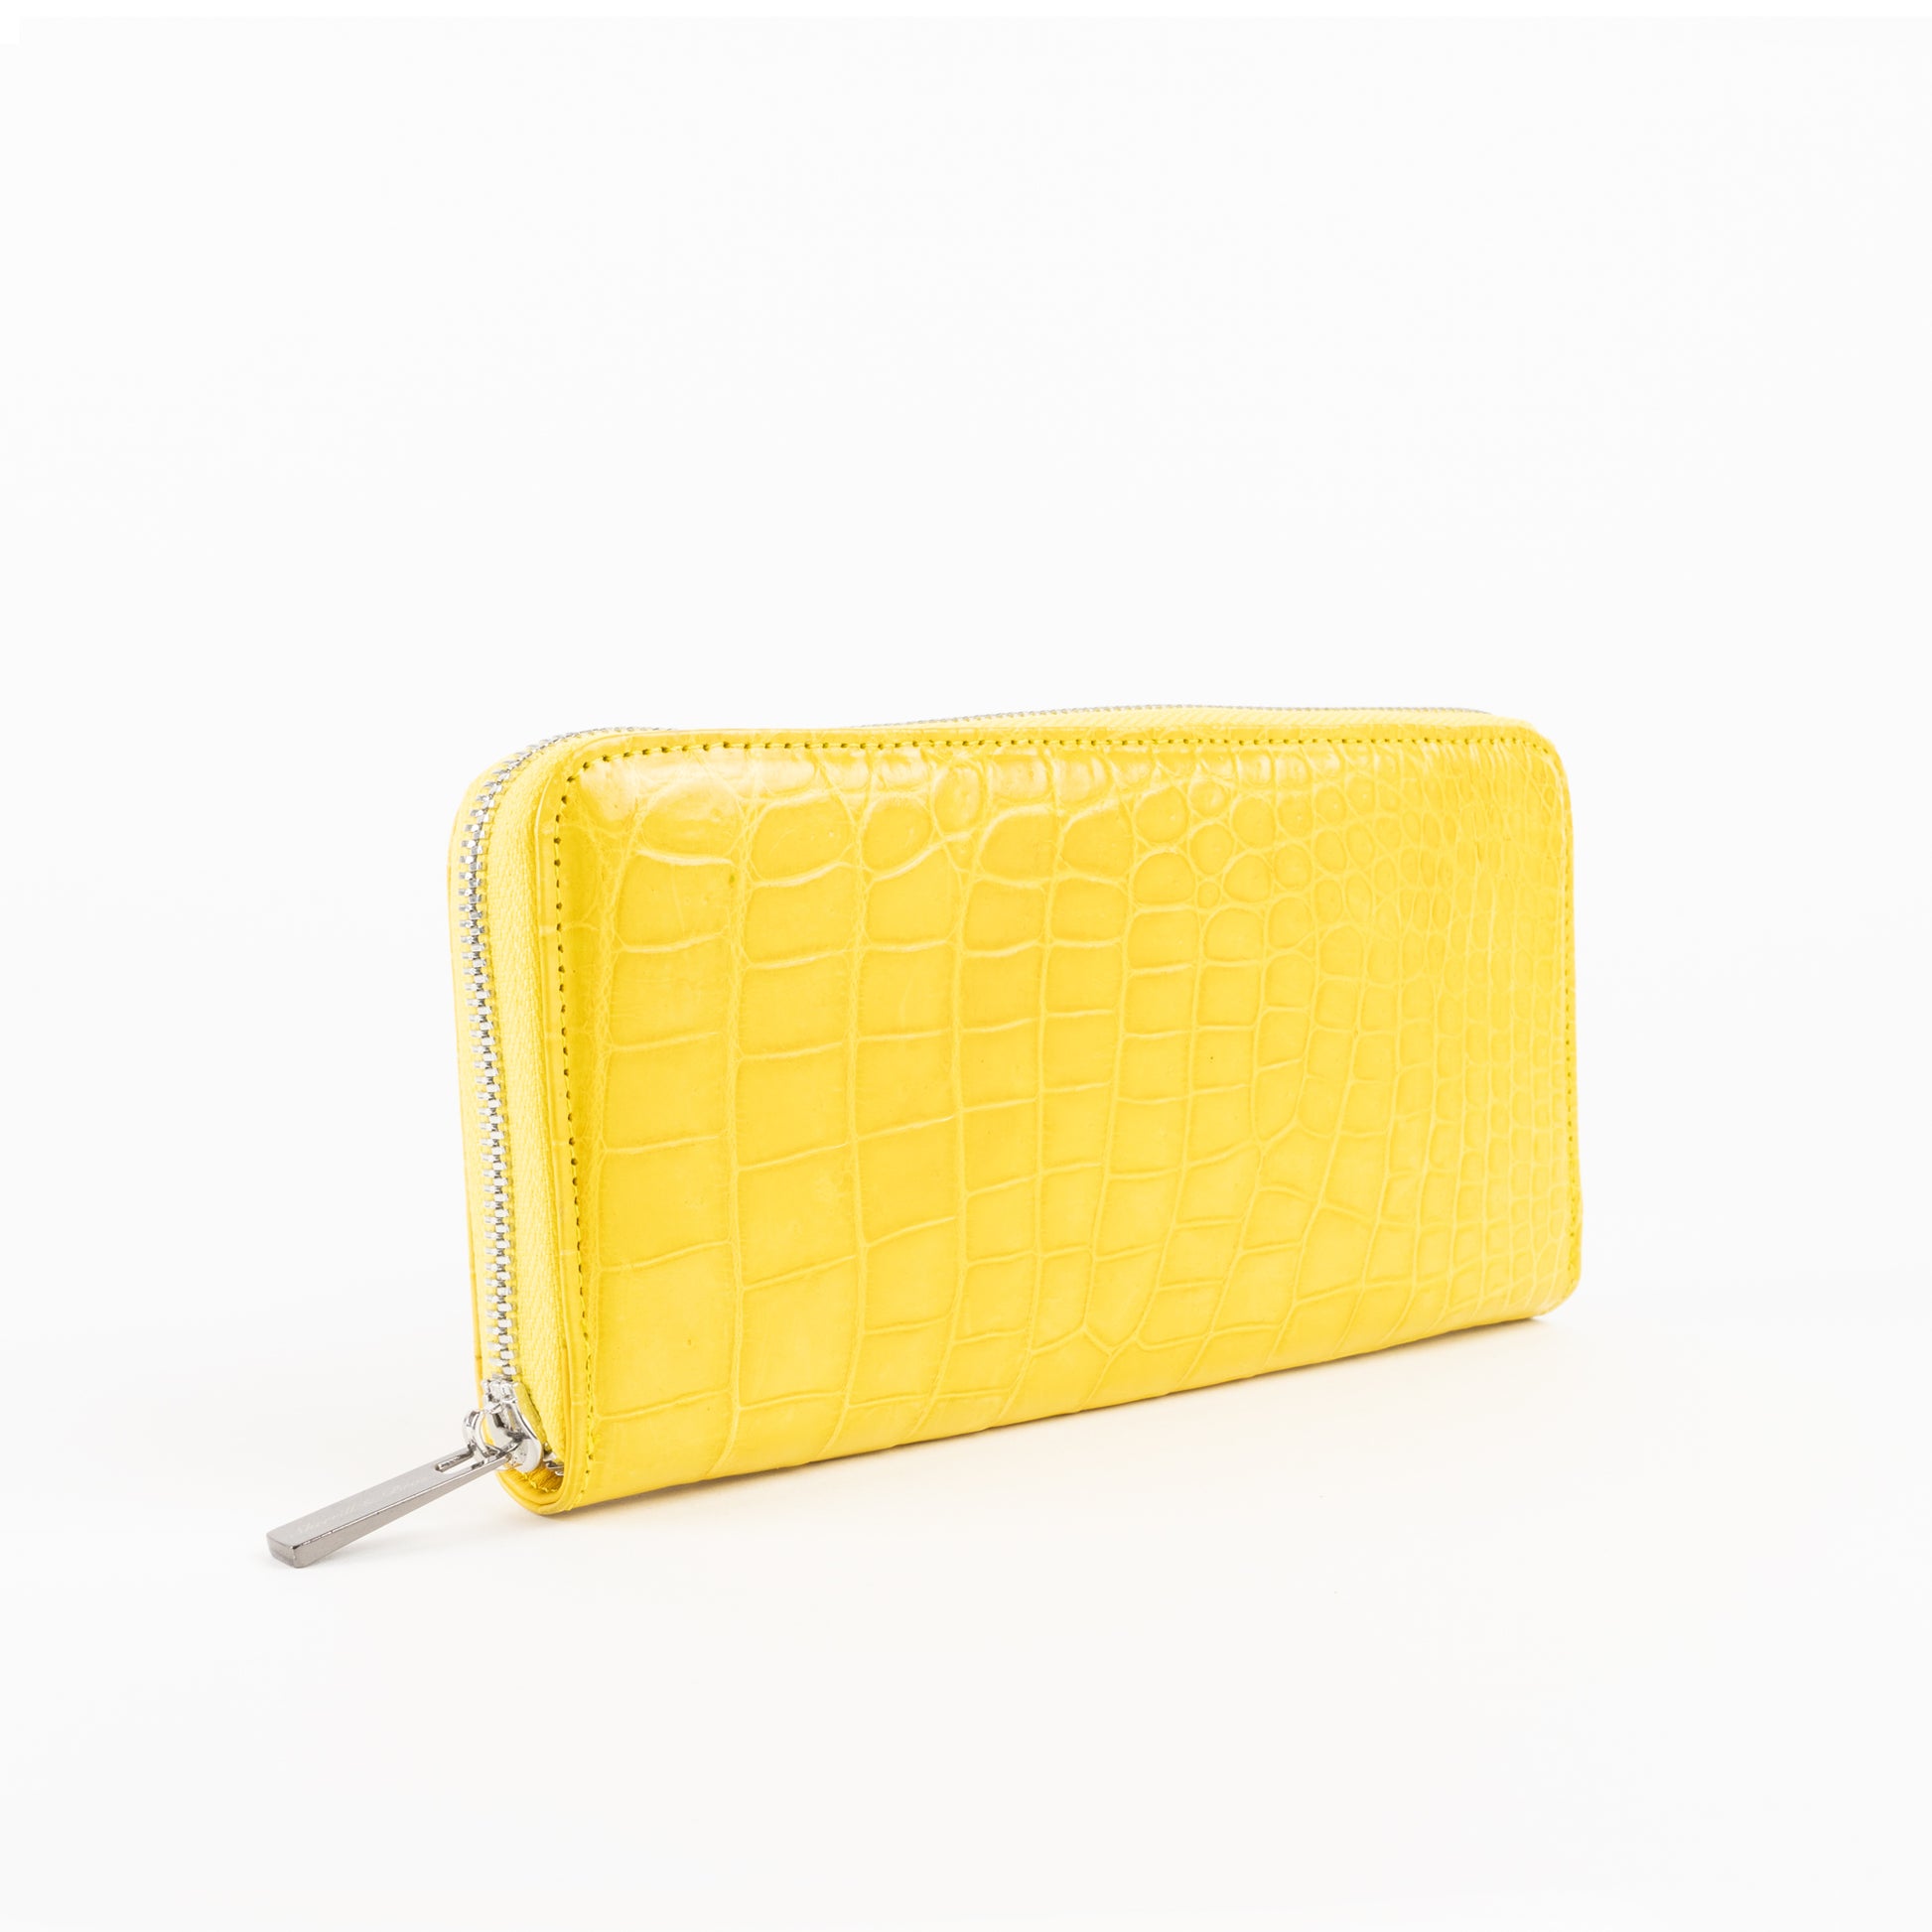 Yellow leather zipper clutch nyc